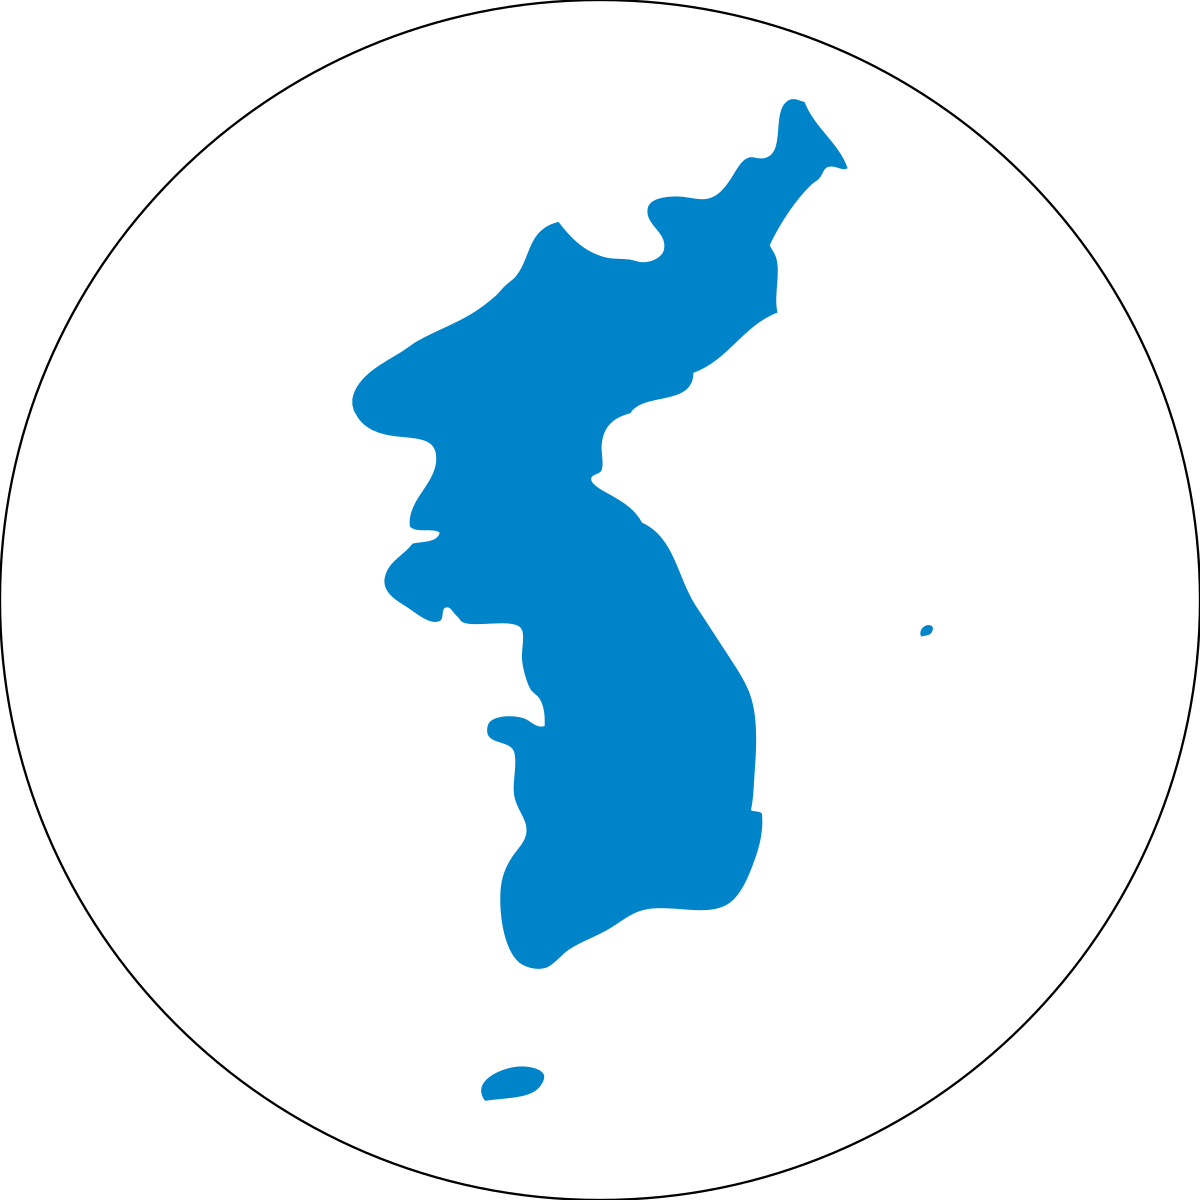 Download File:Unification flag of Korea icon.svg - Wikimedia Commons